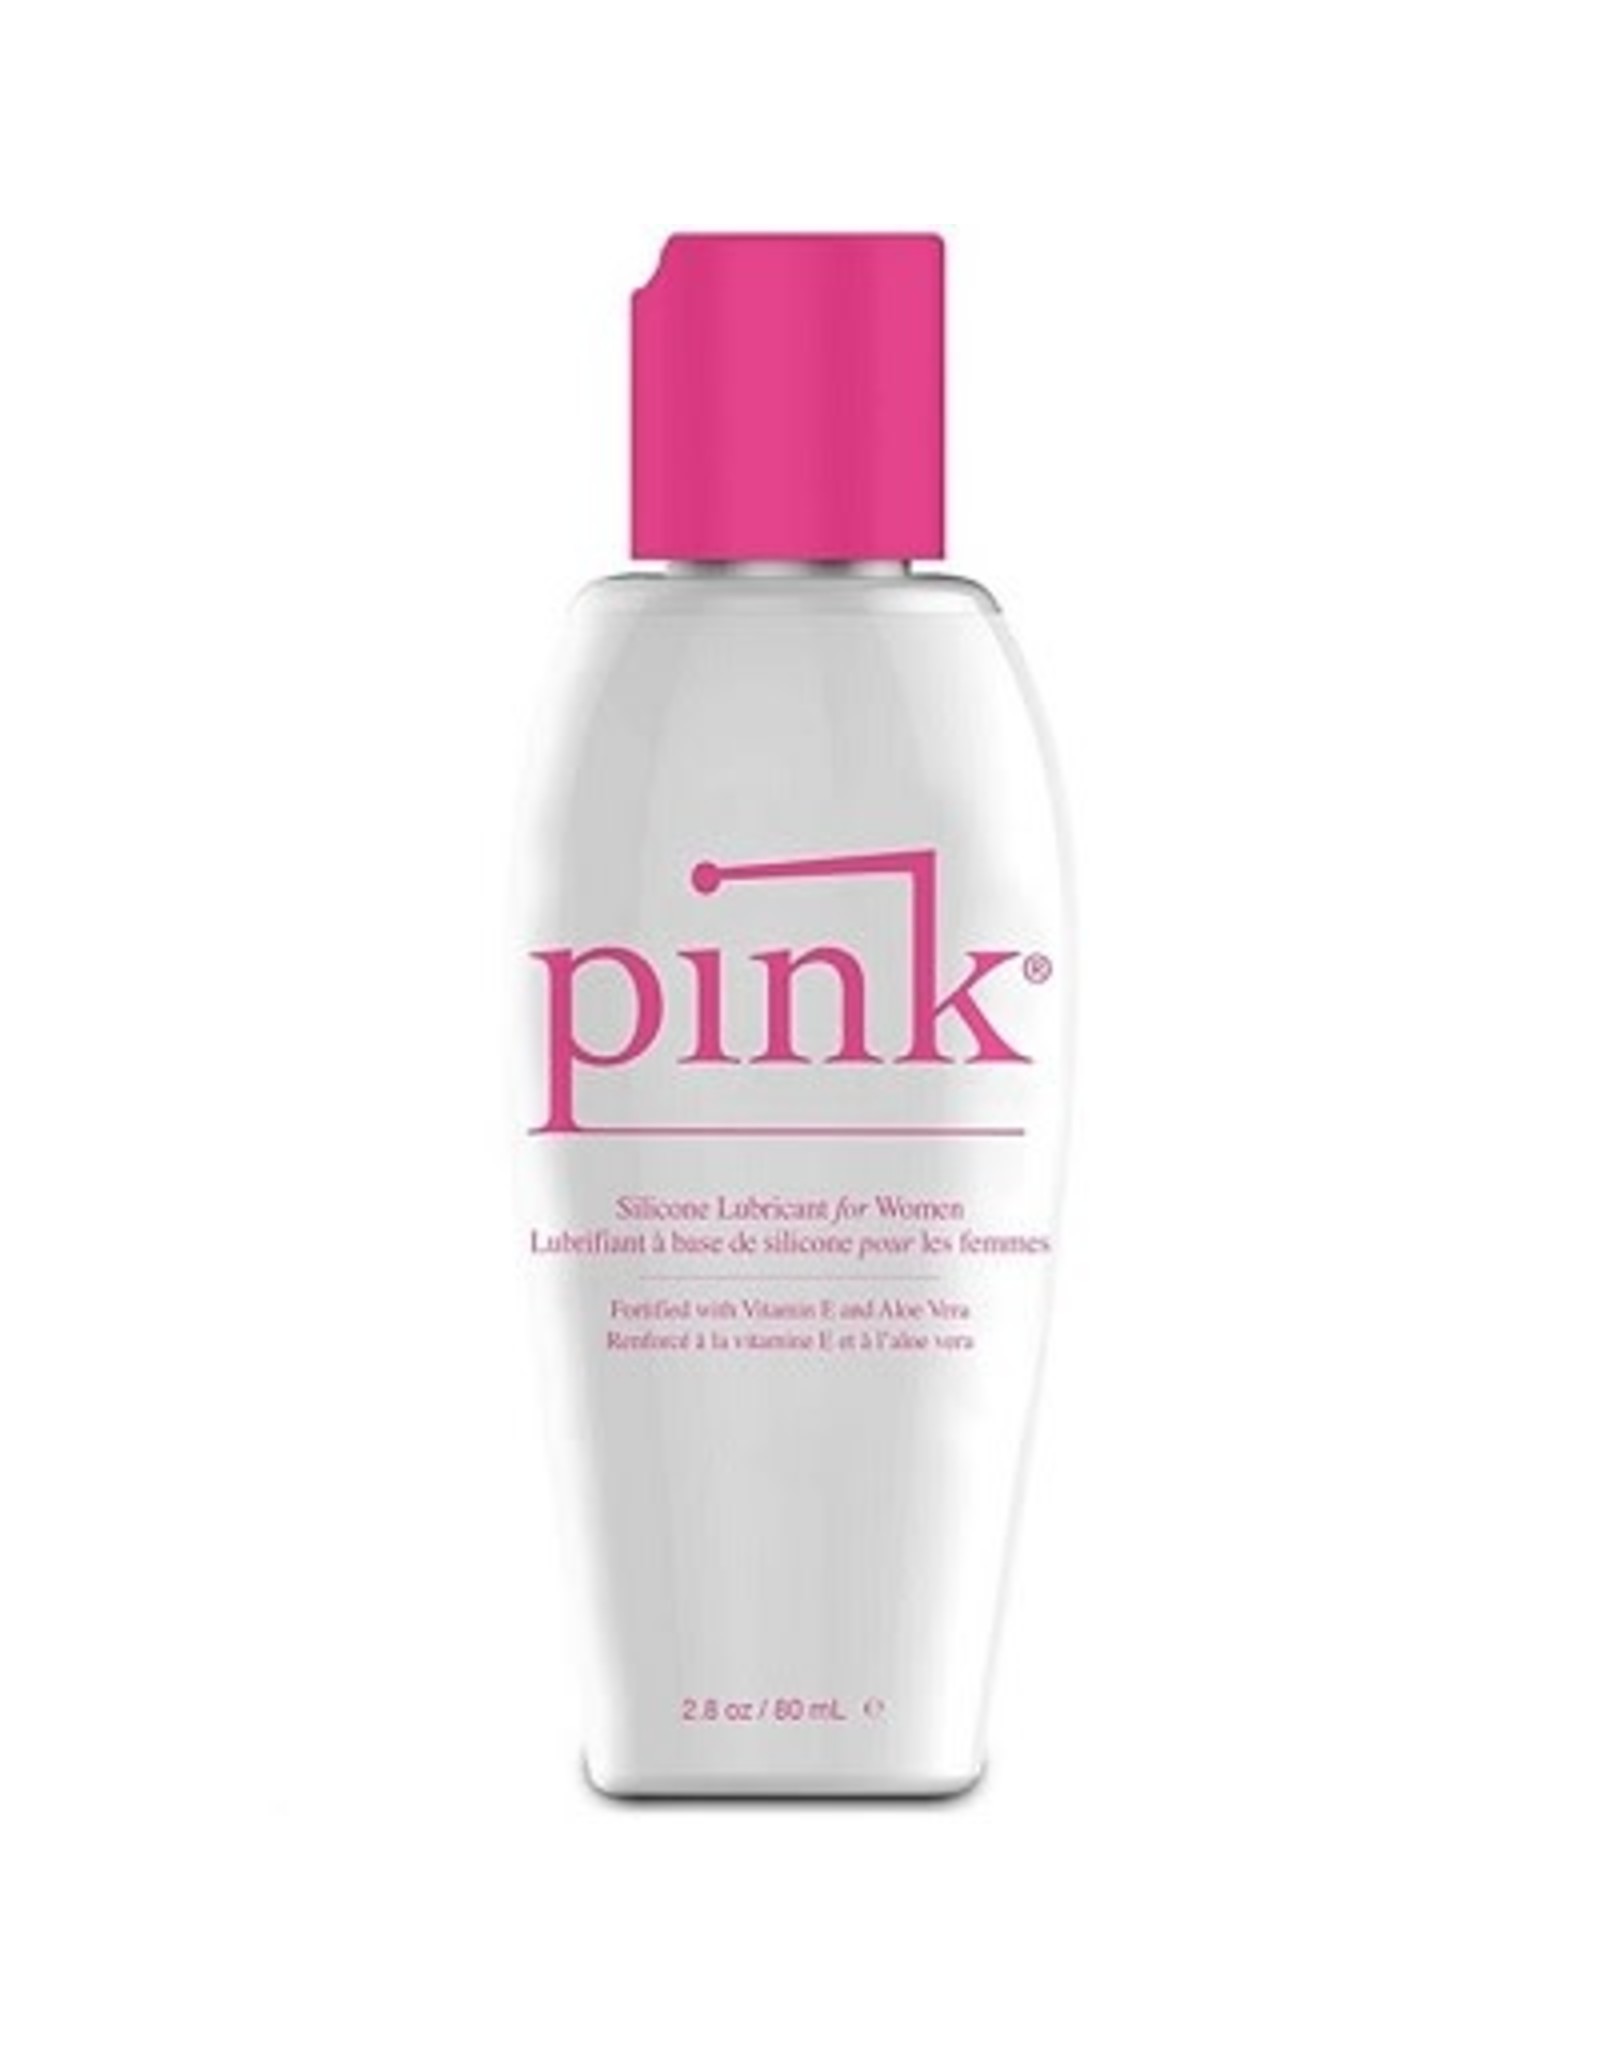 Empowered Products Pink - Silicone - 2.8 oz